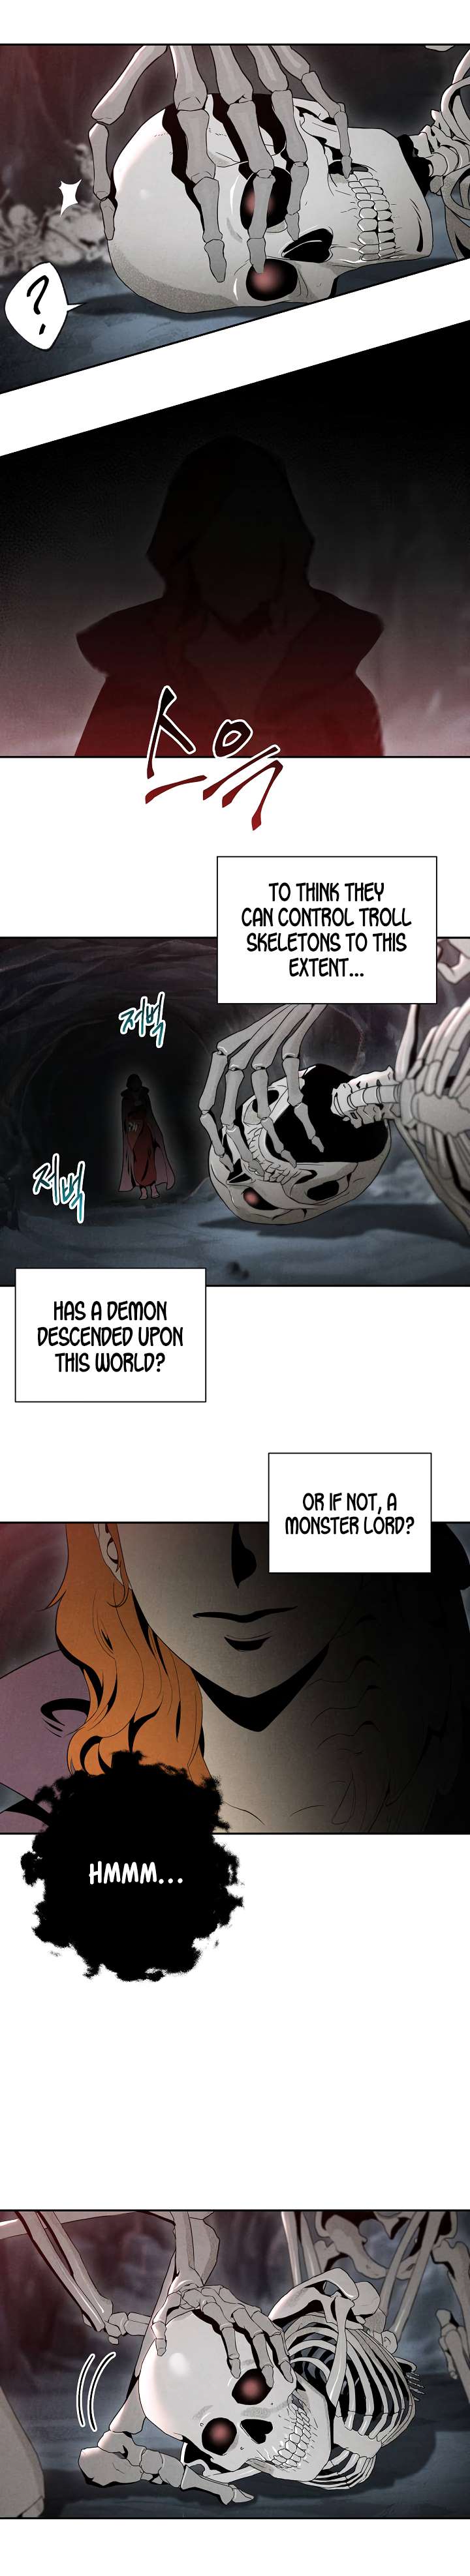 Skeleton Soldier chapter 48 page 8